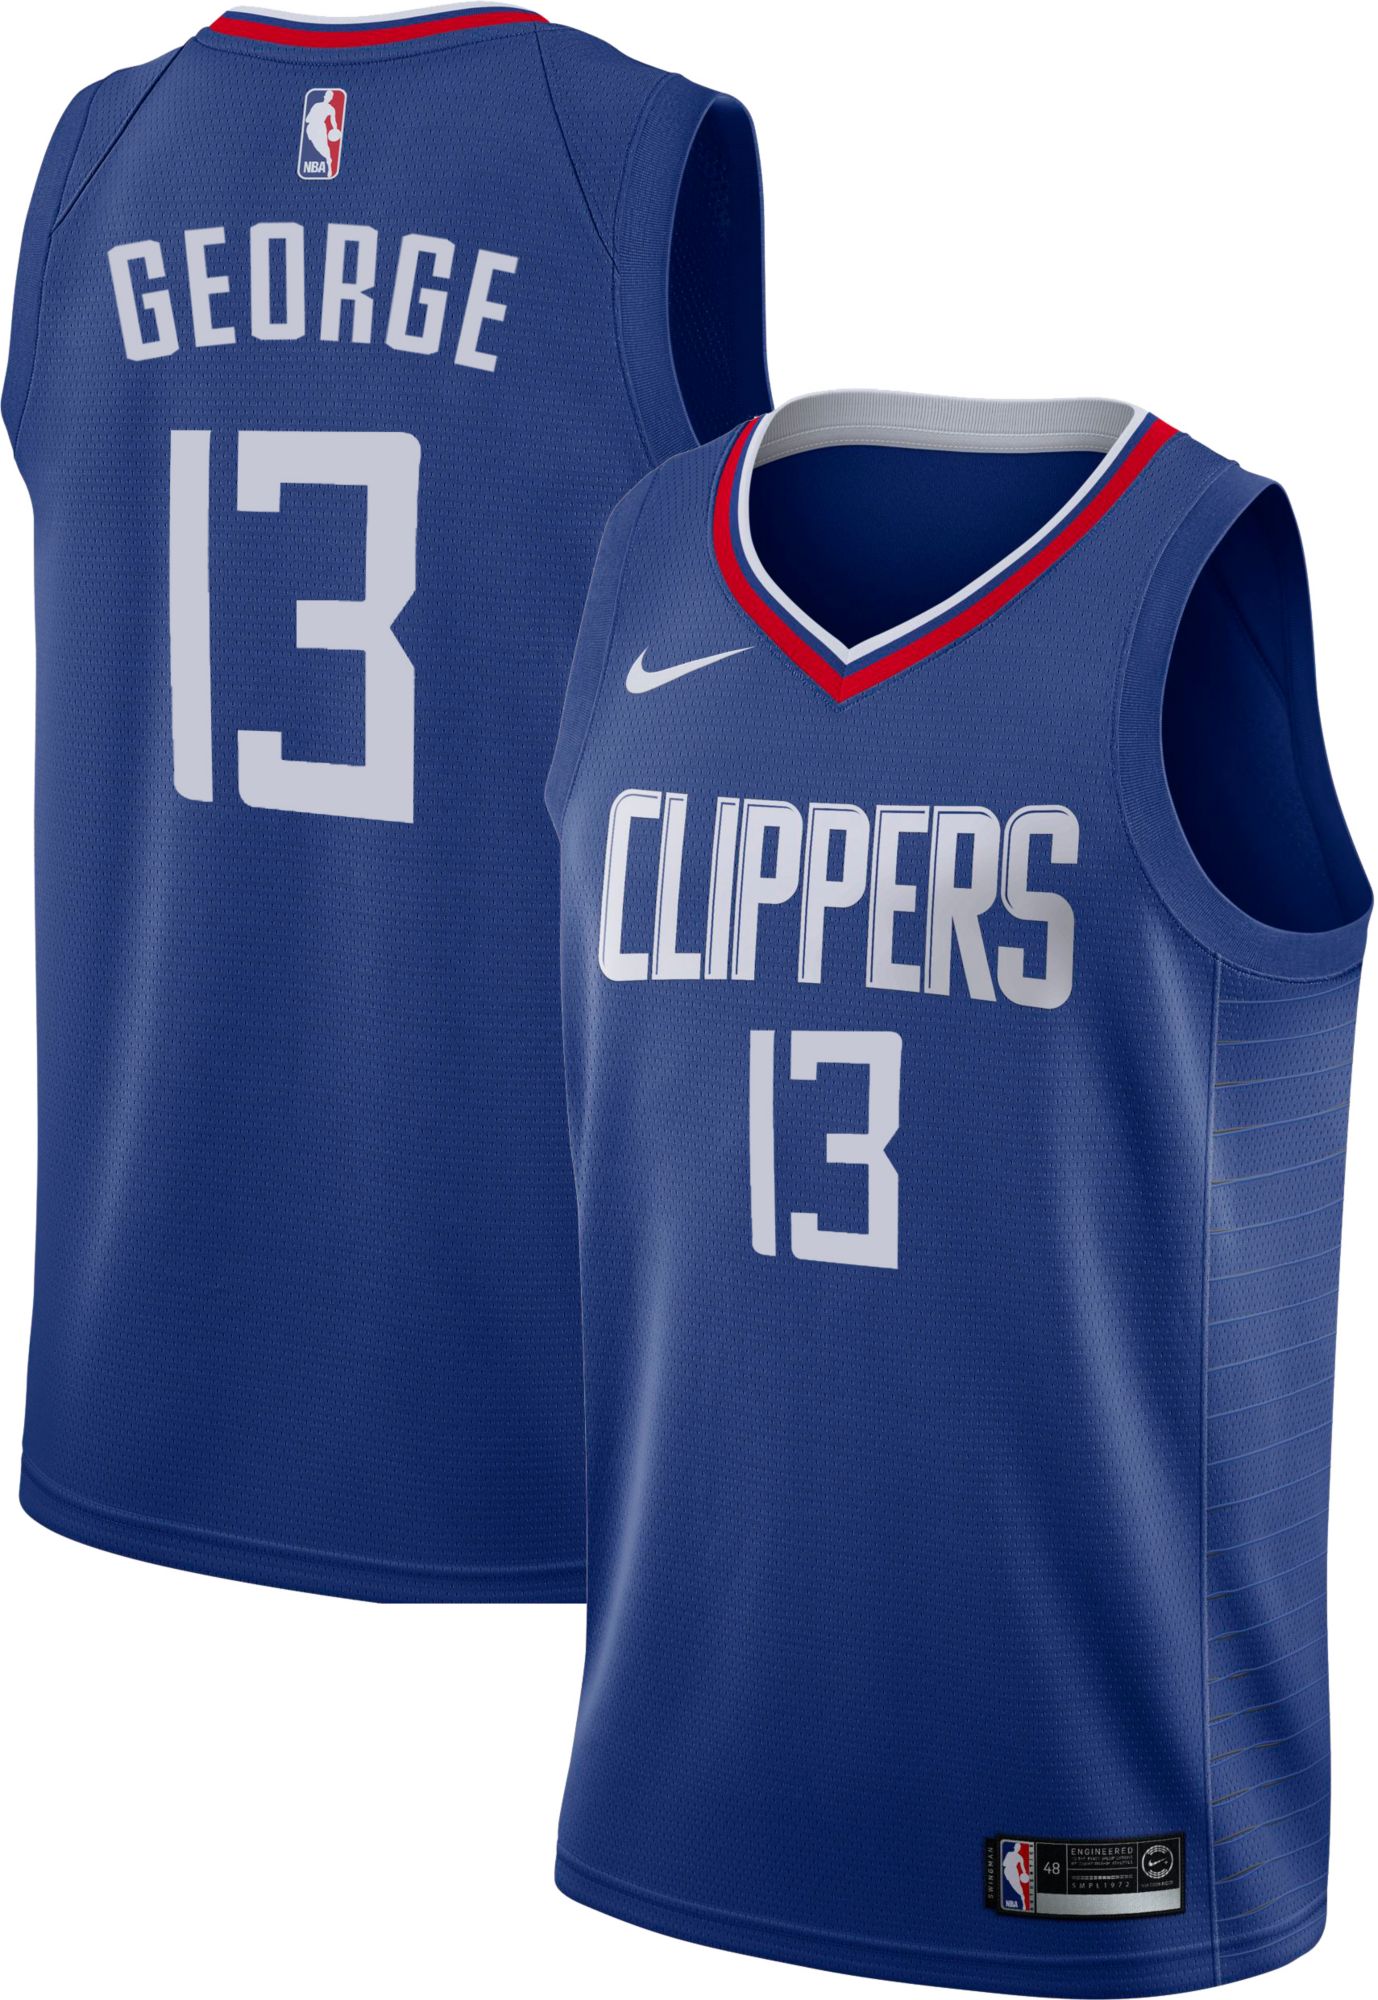 clippers 13 jersey